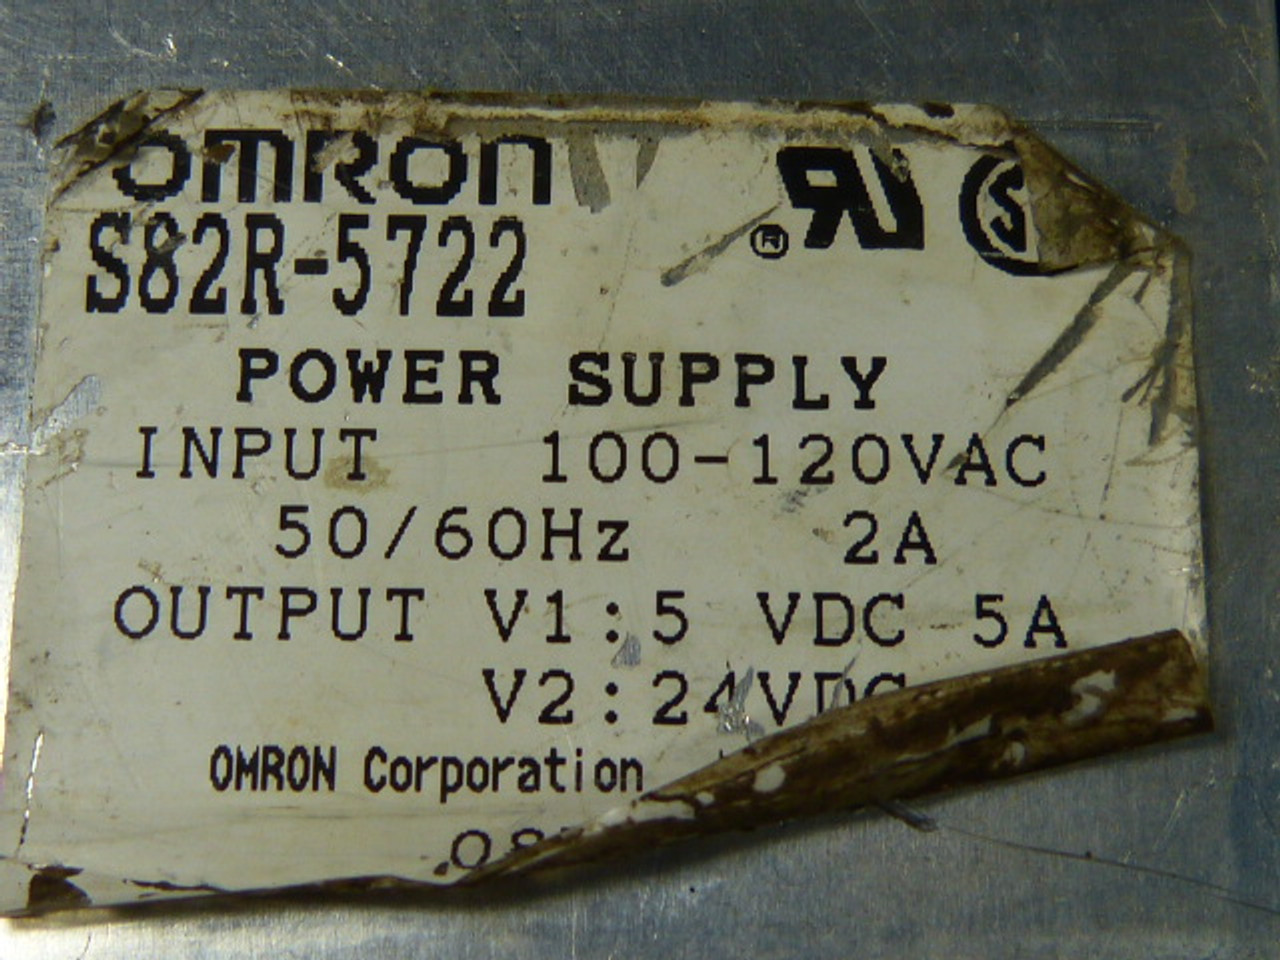 Omron S82R-5722 Power Supply Dual Out 5Amp 120Vac USED